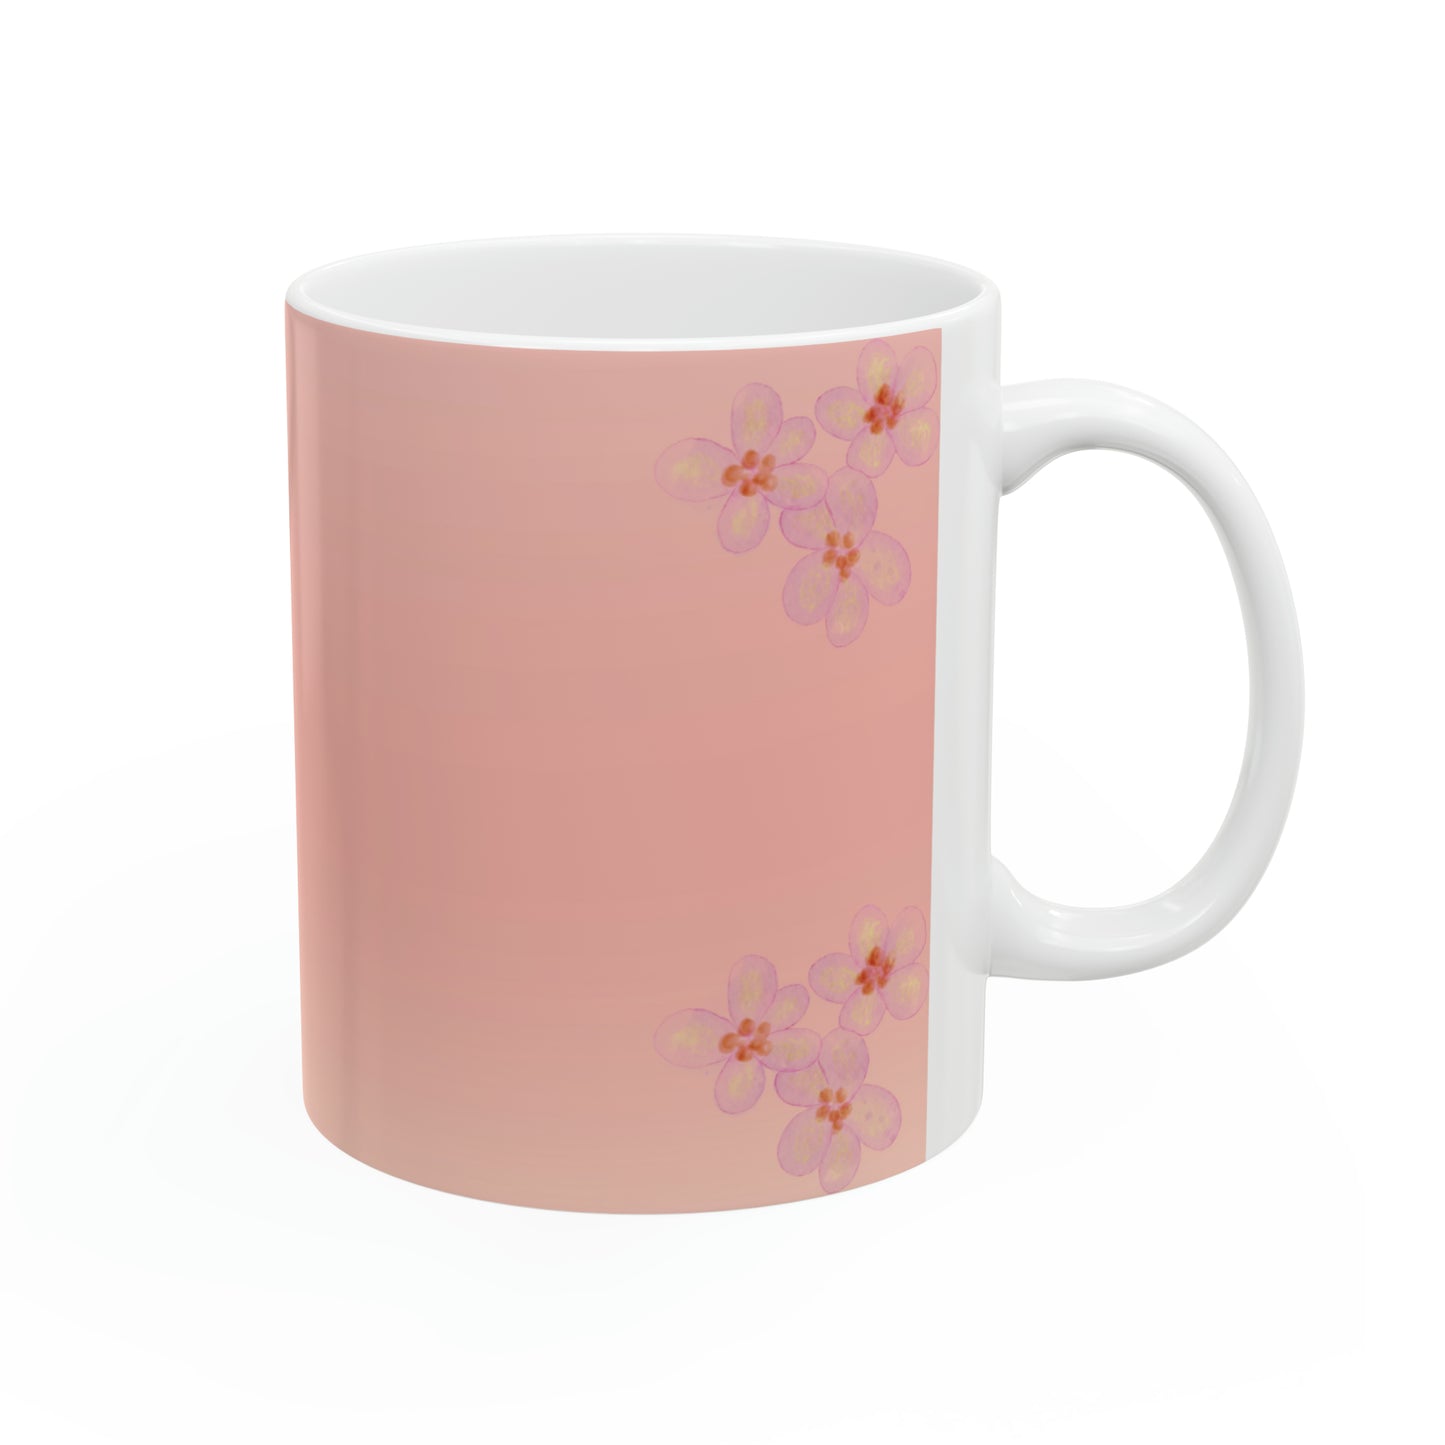 Stay In Your Own Energy - Spring Mug